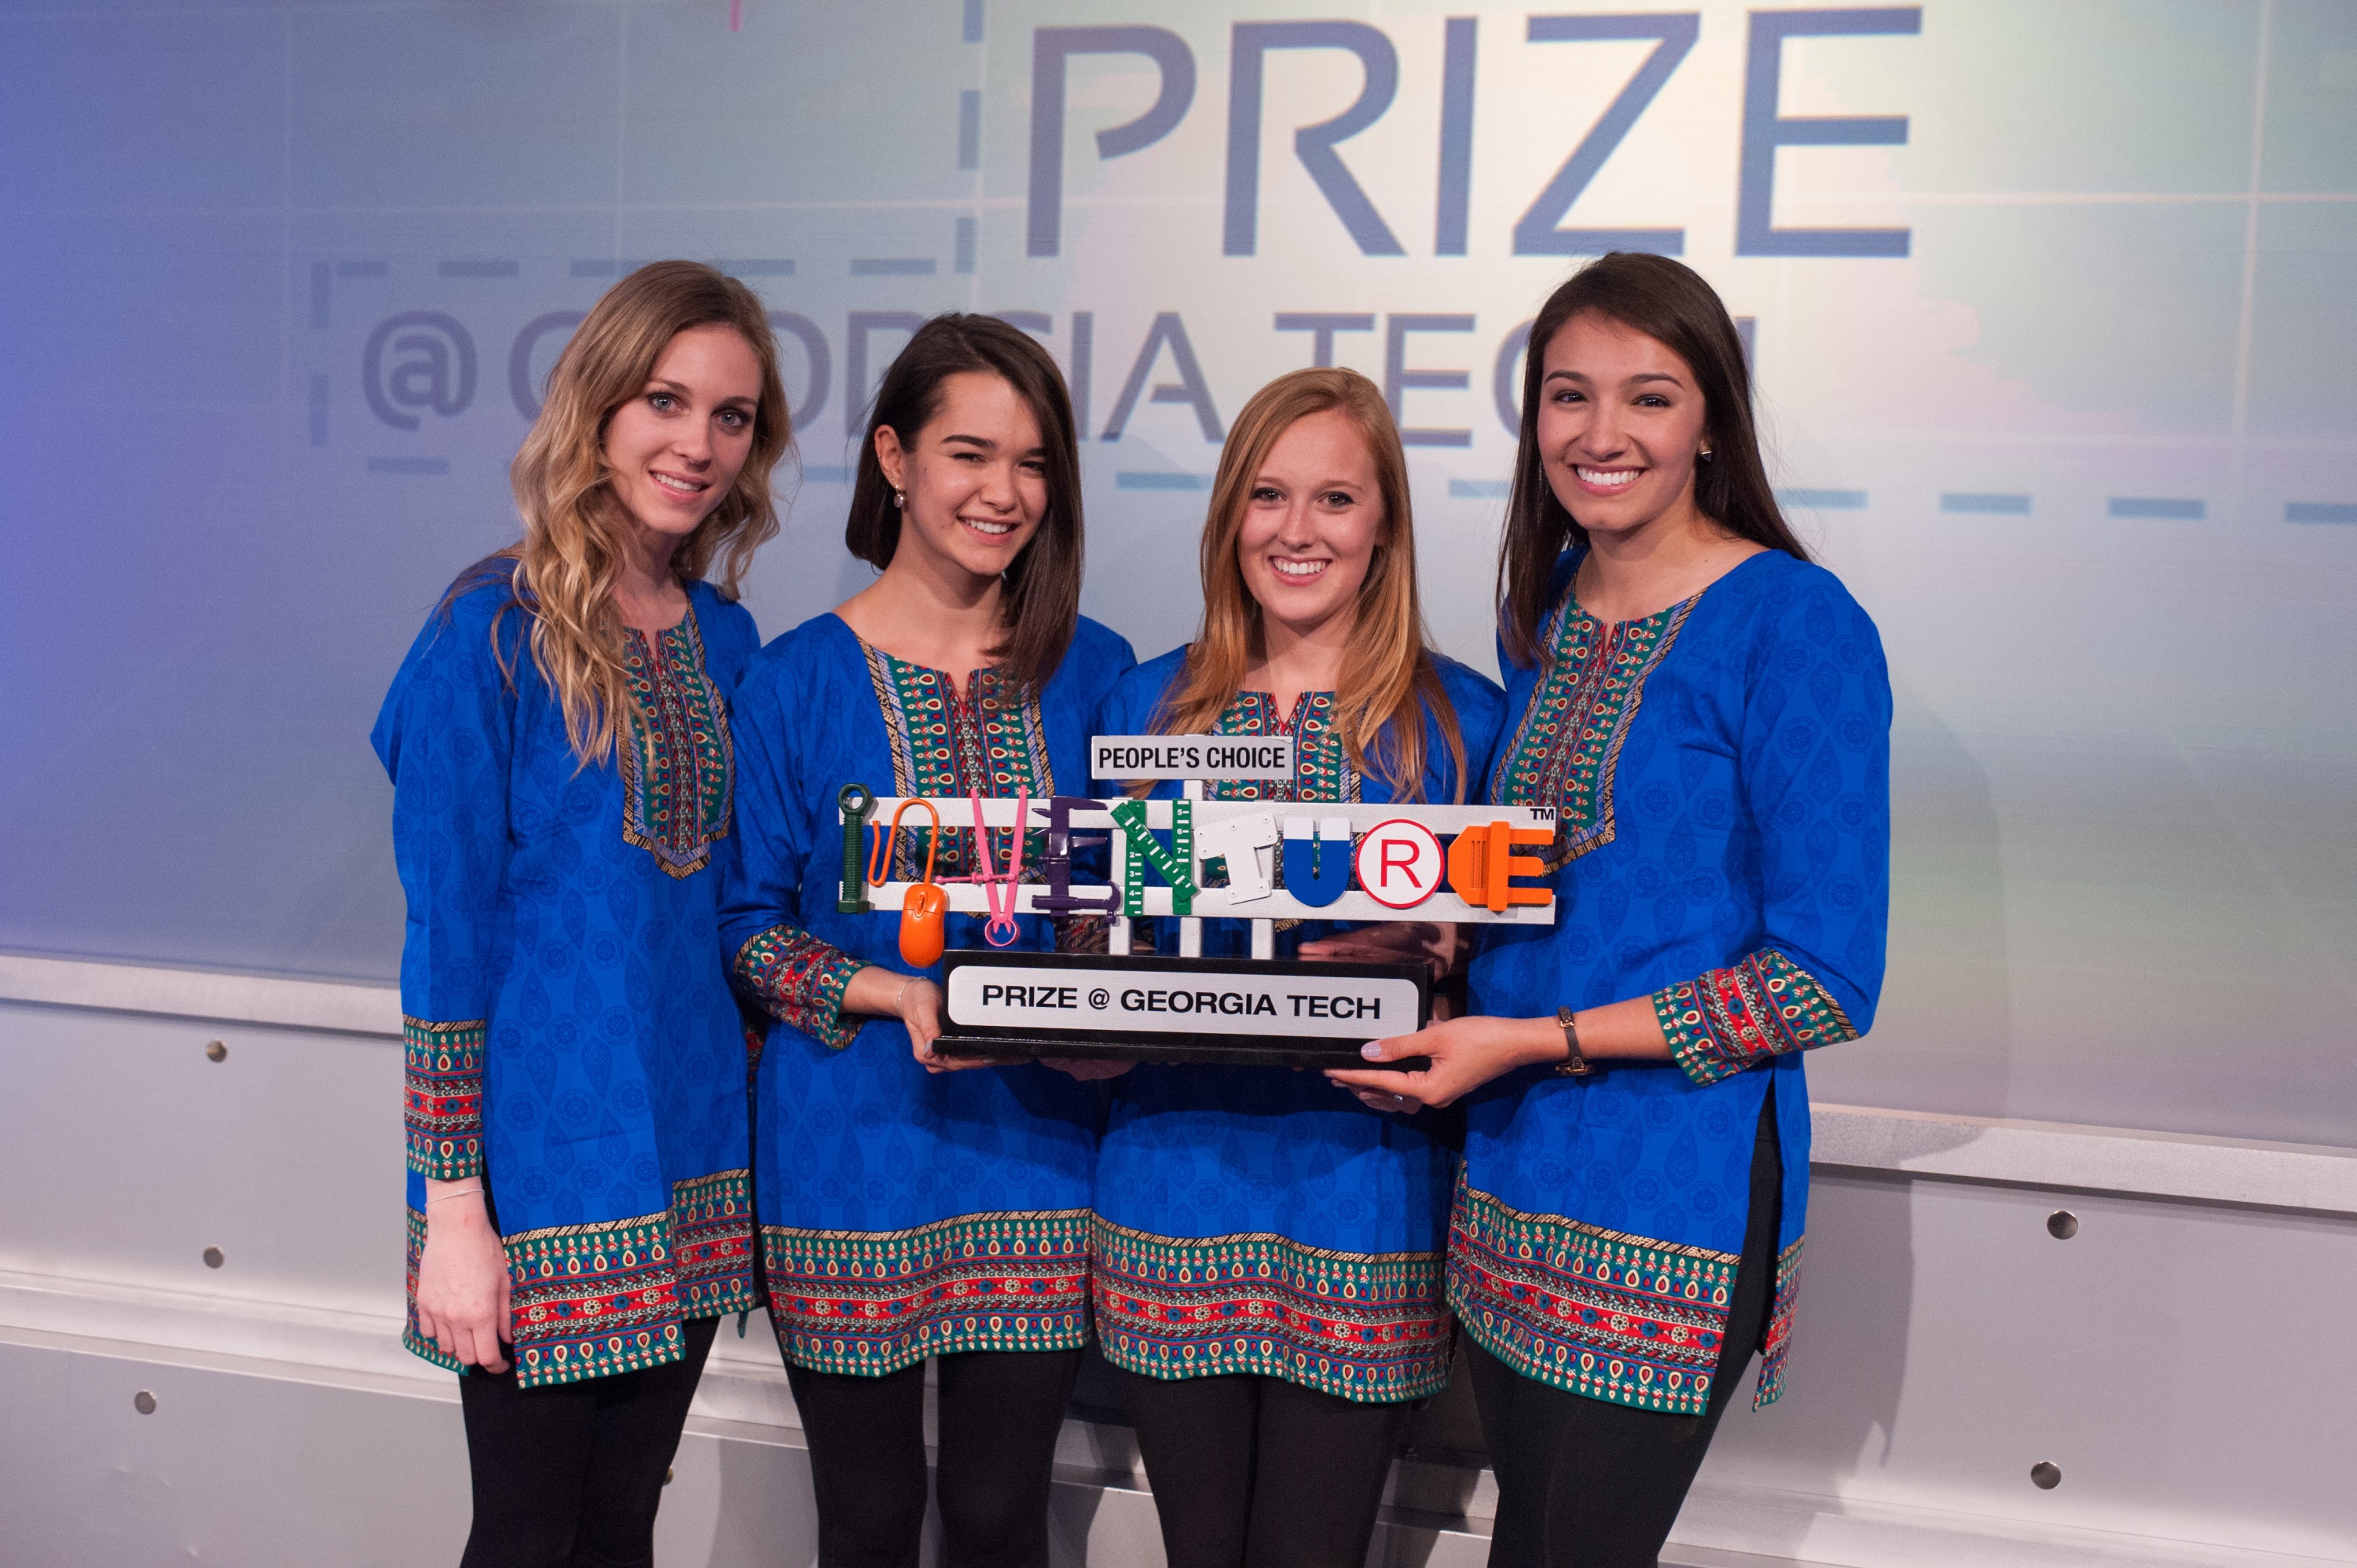 TruePani won $5,000 and the 2016 InVenture Prize People’s Choice Award.The team designed an antimicrobial cup and water storage device that makes drinking water safer. The social entrepreneurs came up with the device after two of the team members traveled across India.The inventors are: Samantha Becker, civil engineering; Sarah Lynn Bowen, business administration; Naomi Ergun, business administration; and Shannon Evanchec, environmental engineering.Photo by Fitrah Hamid.